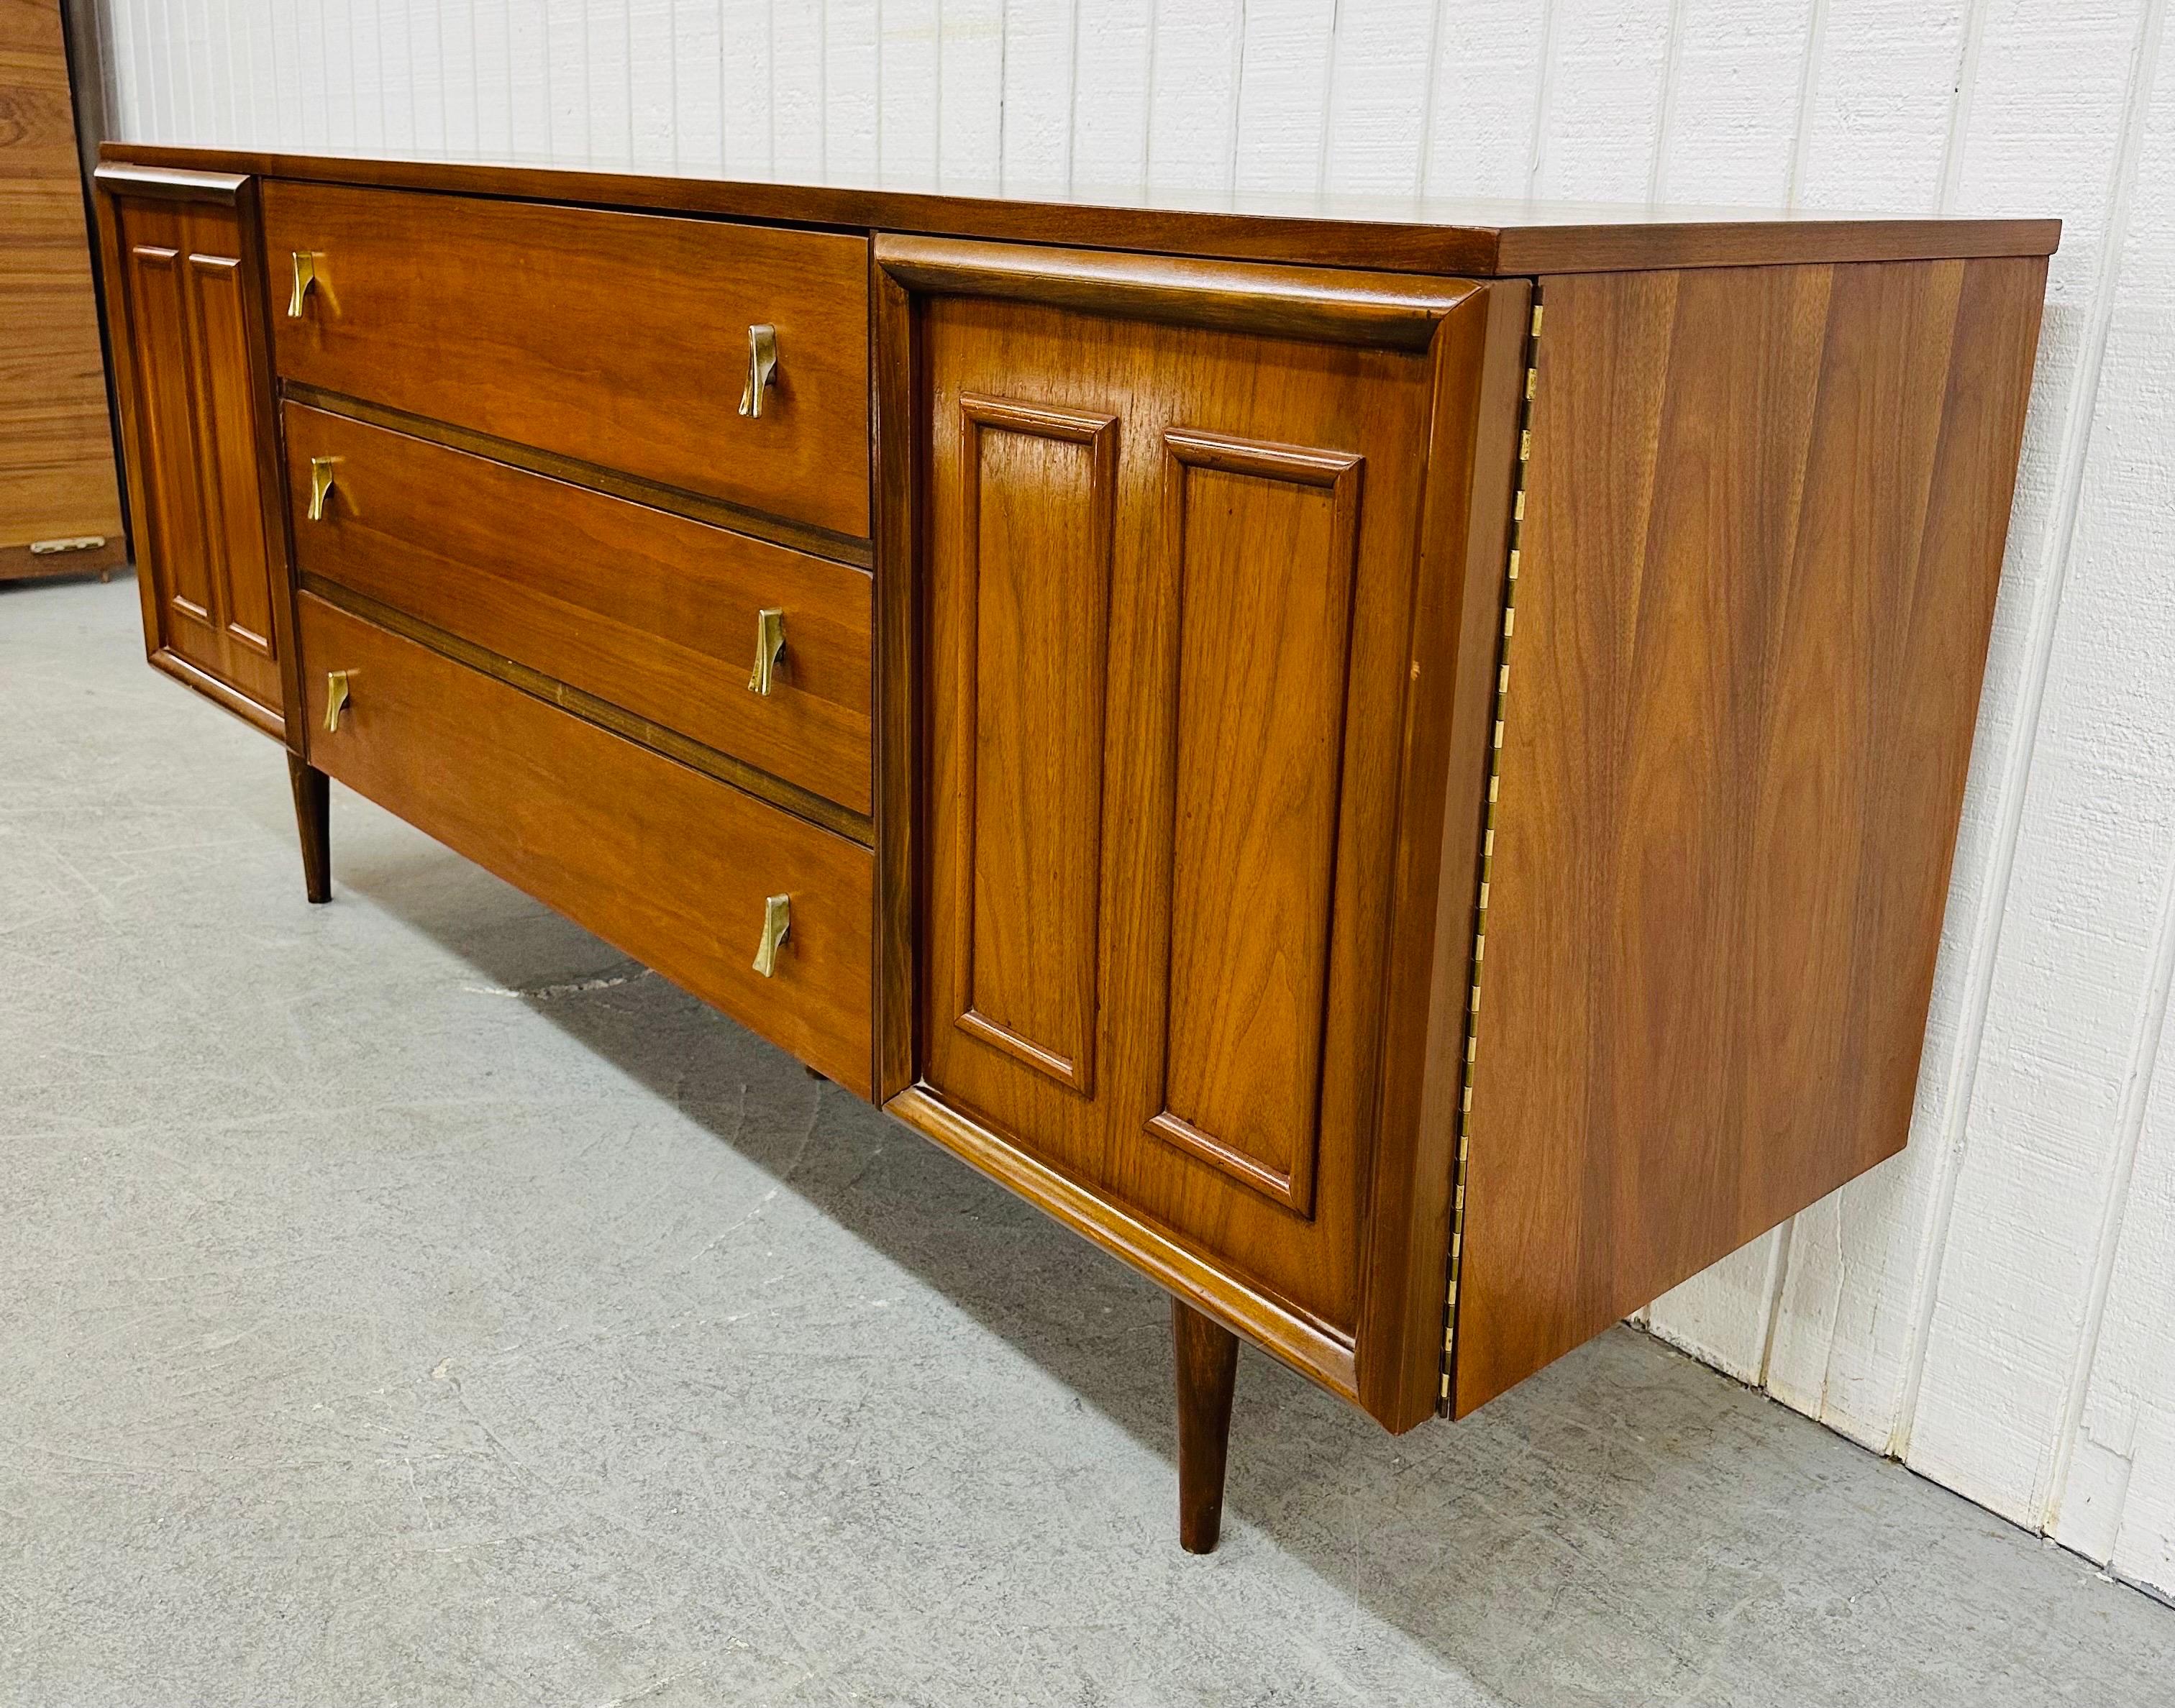 This listing is for a Mid-Century Modern Walnut Triple Dresser. Featuring a straight line design, doors on each side with walnut trim that open up to three hidden drawers, three larger center drawers with brass hardware, modern legs, and a beautiful